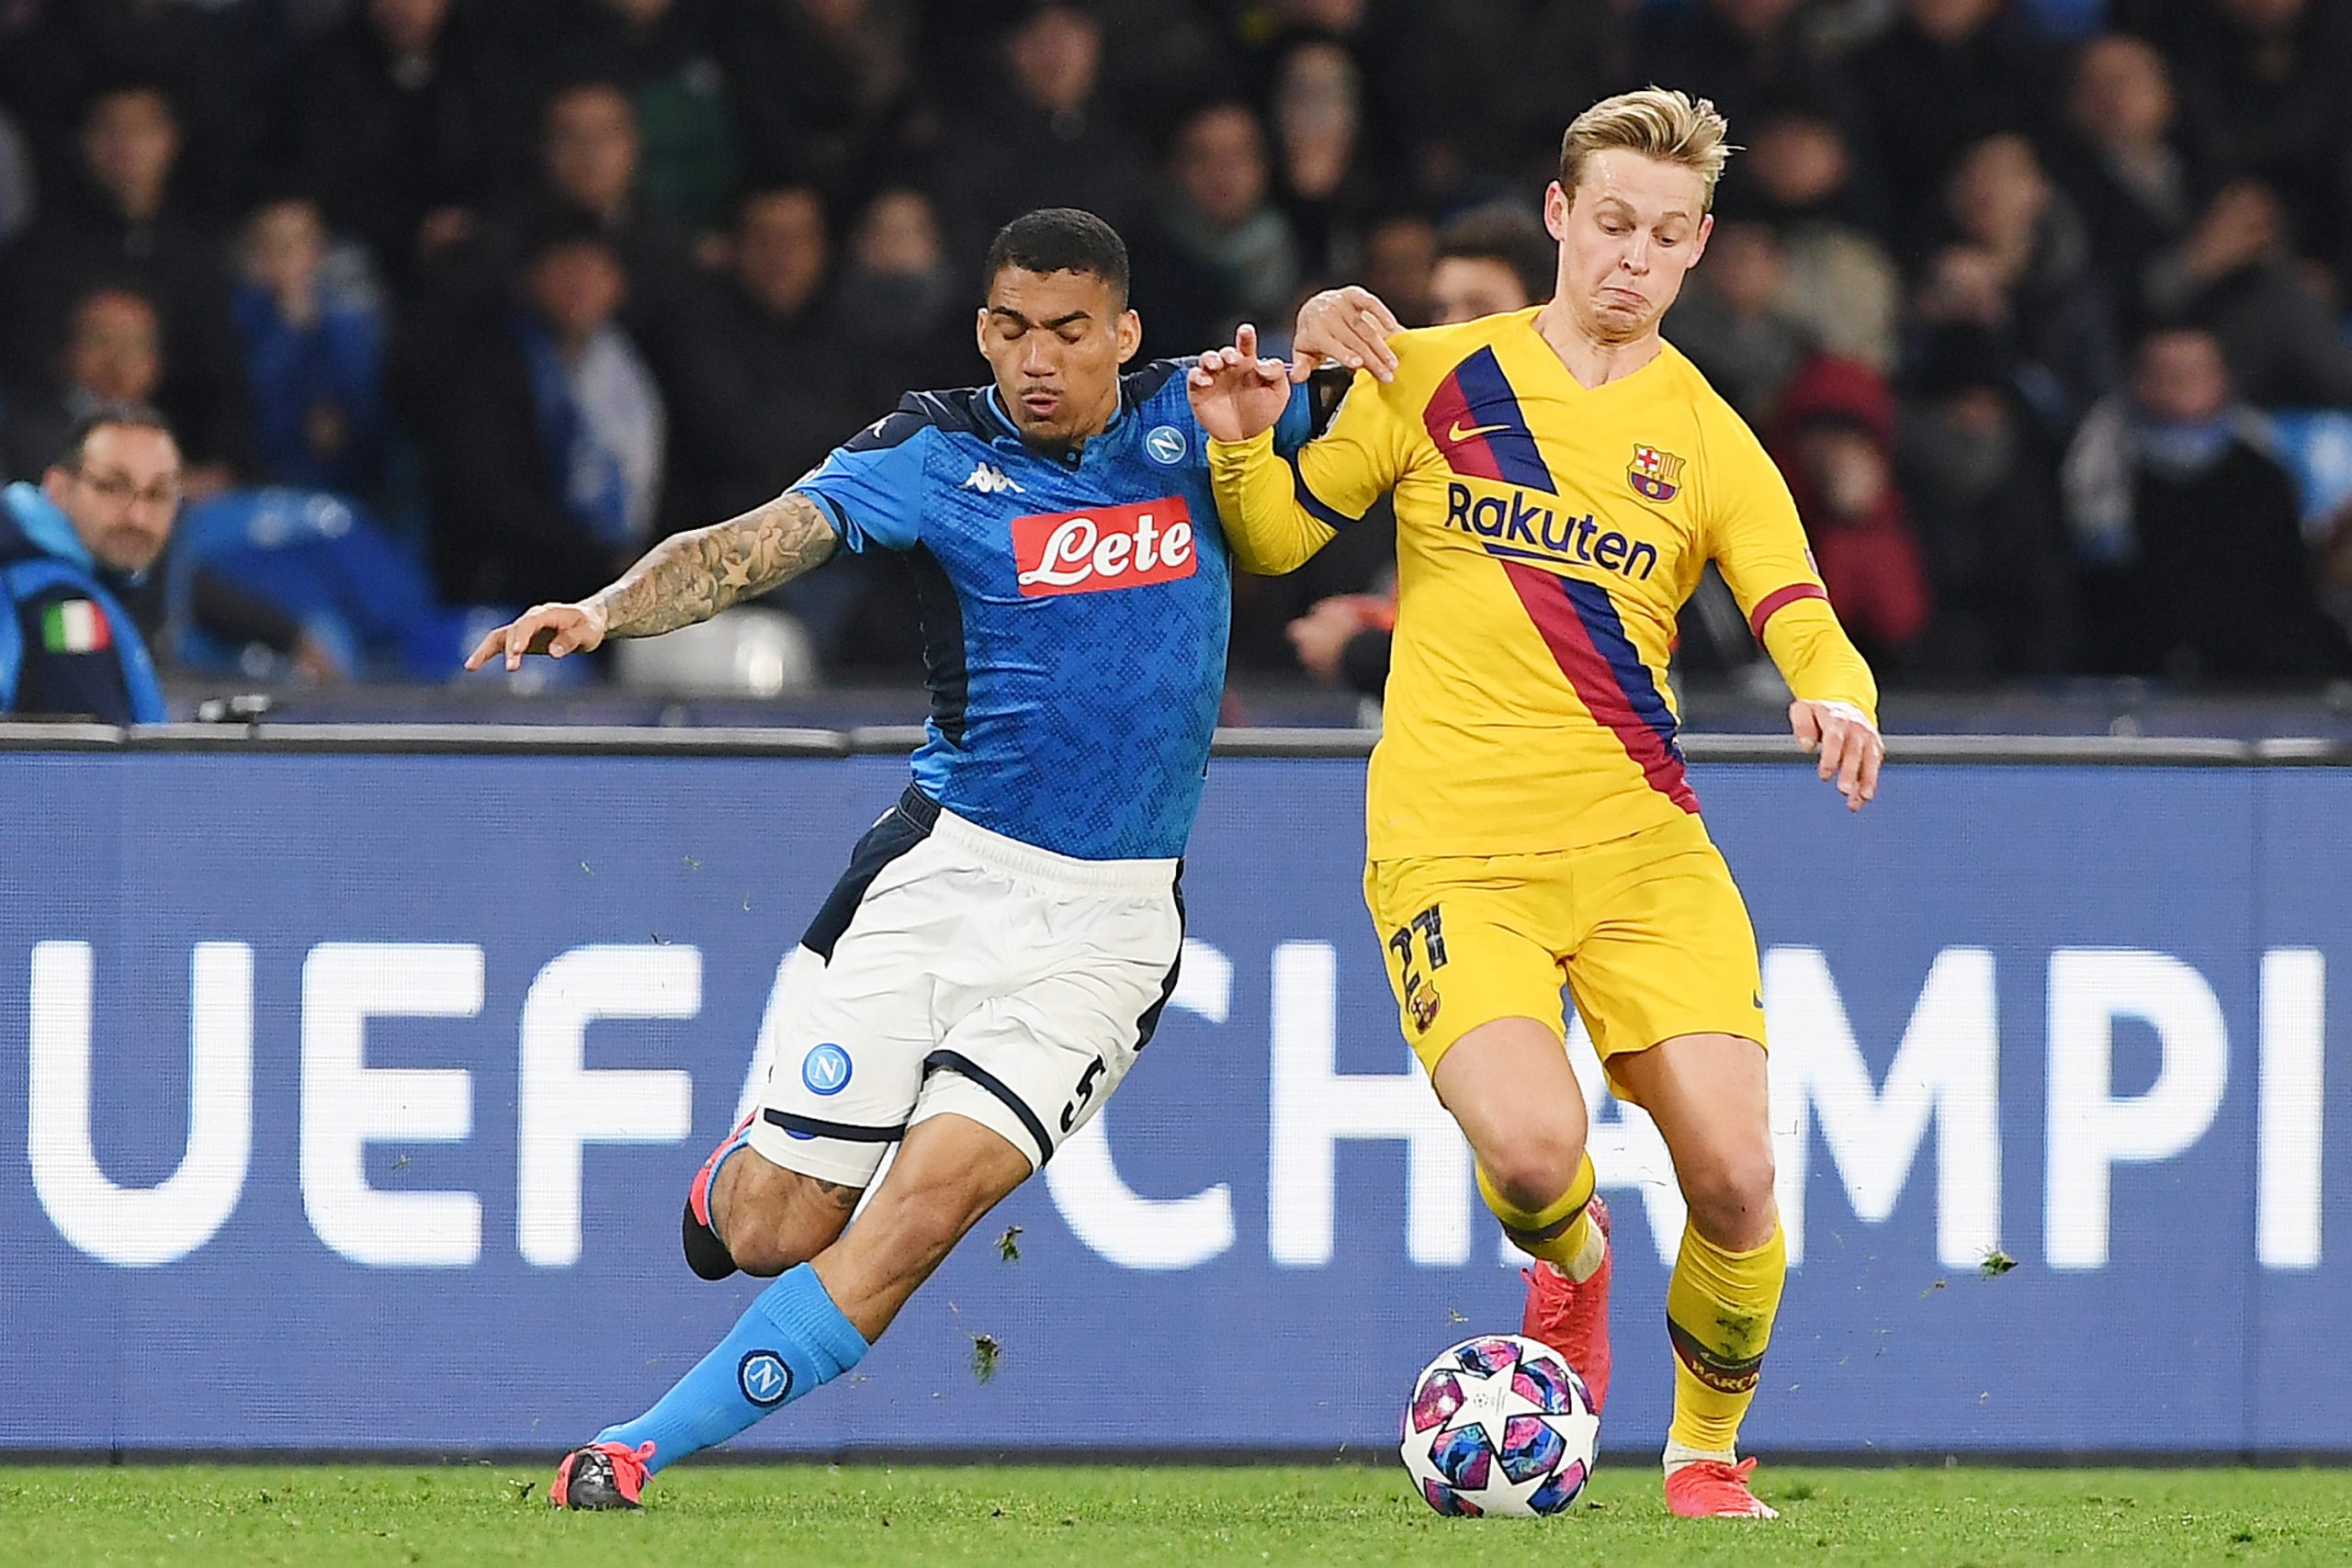 Everton set to win the race for Napoli midfielder Allan who is in action in the picture